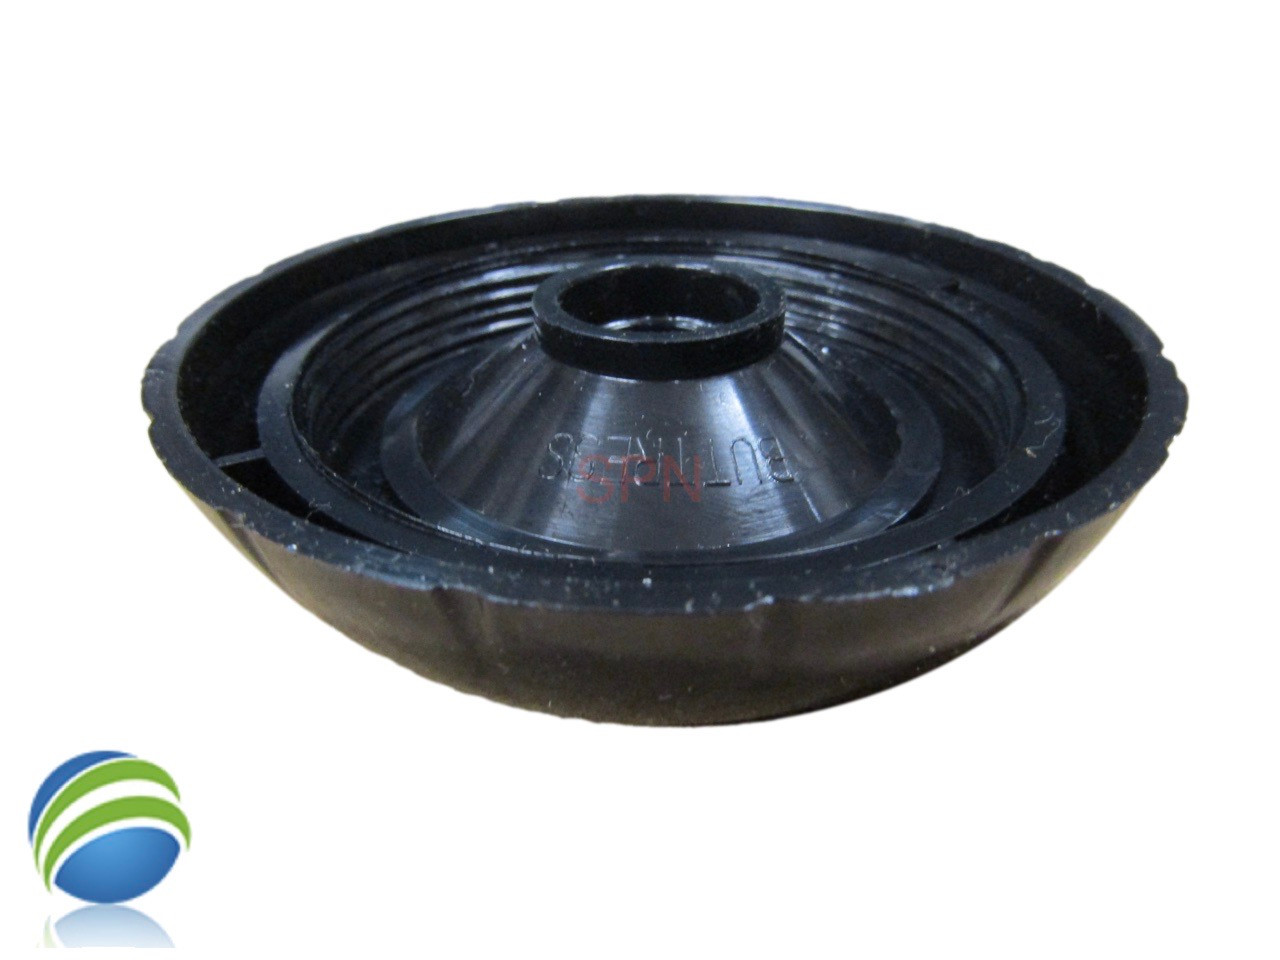 Spa Hot Tub Diverter Cap 3 3/4" Wide Black Notched Buttress Style